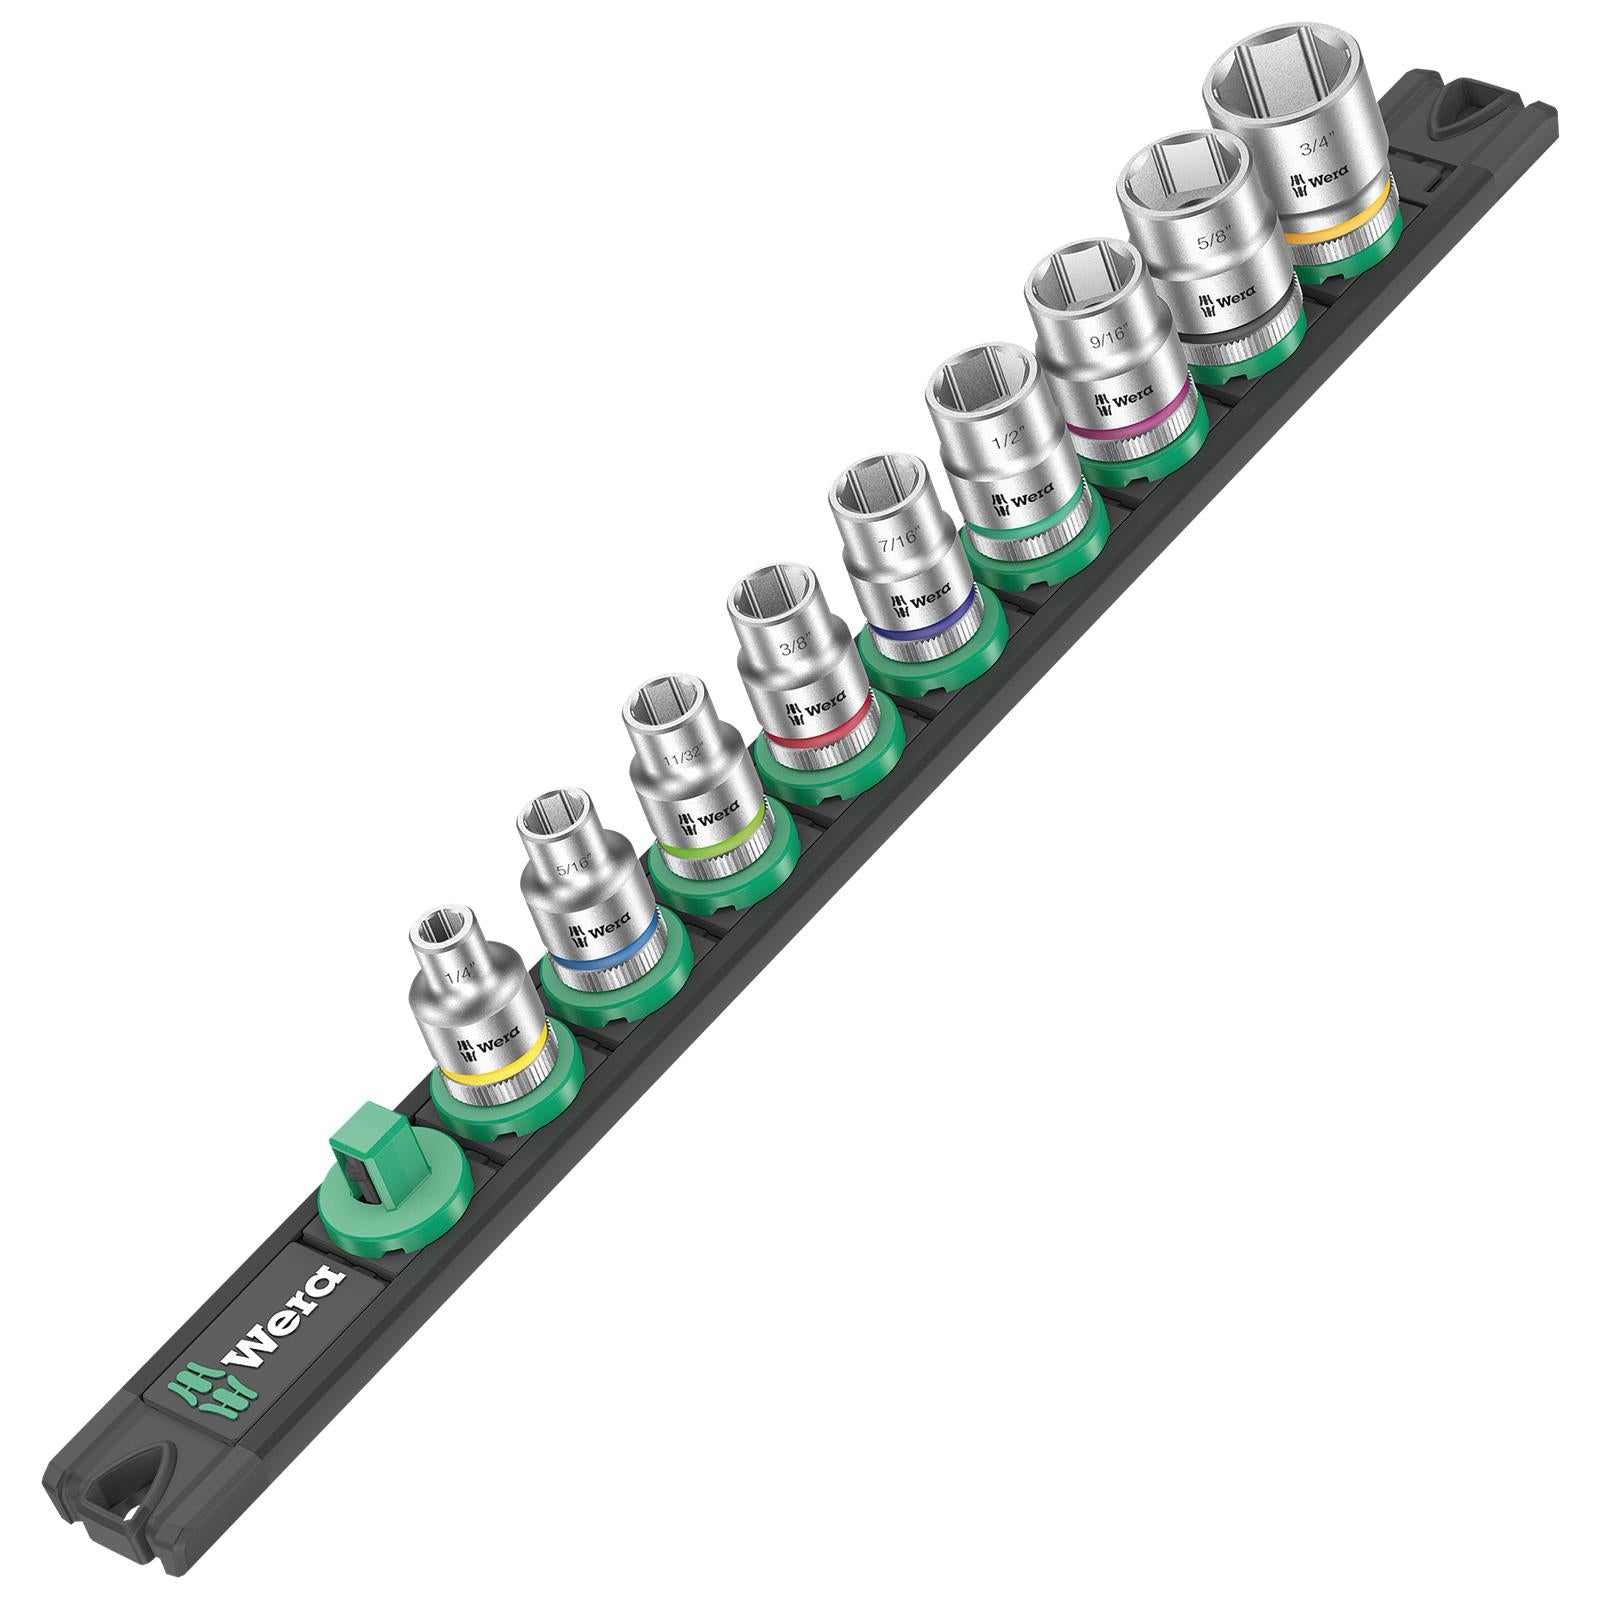 Wera Socket Set 3/8" Drive on Magnetic Socket Rail B Imperial 1 Zyklop 9 Pieces 1/4" to 3/4